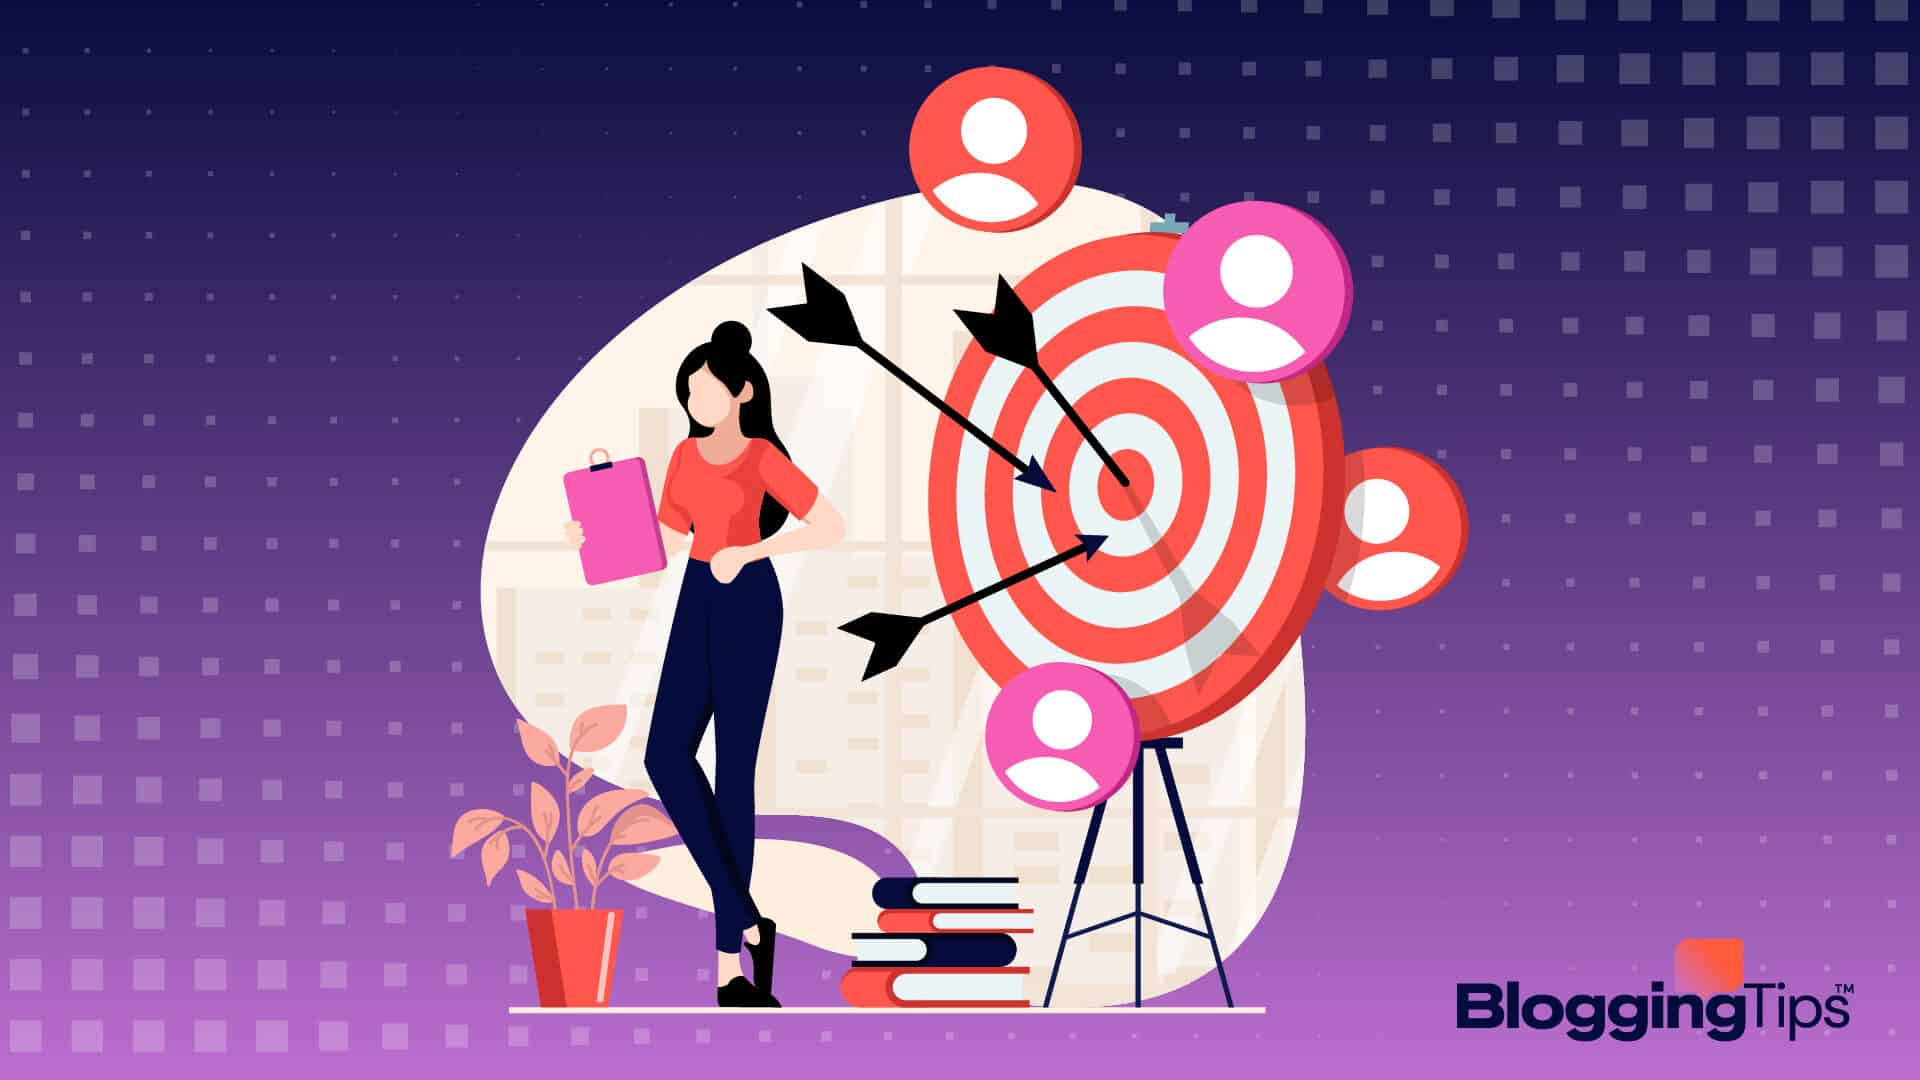 vector graphic showing an illustration of woman trying to get the bulls eye niche example